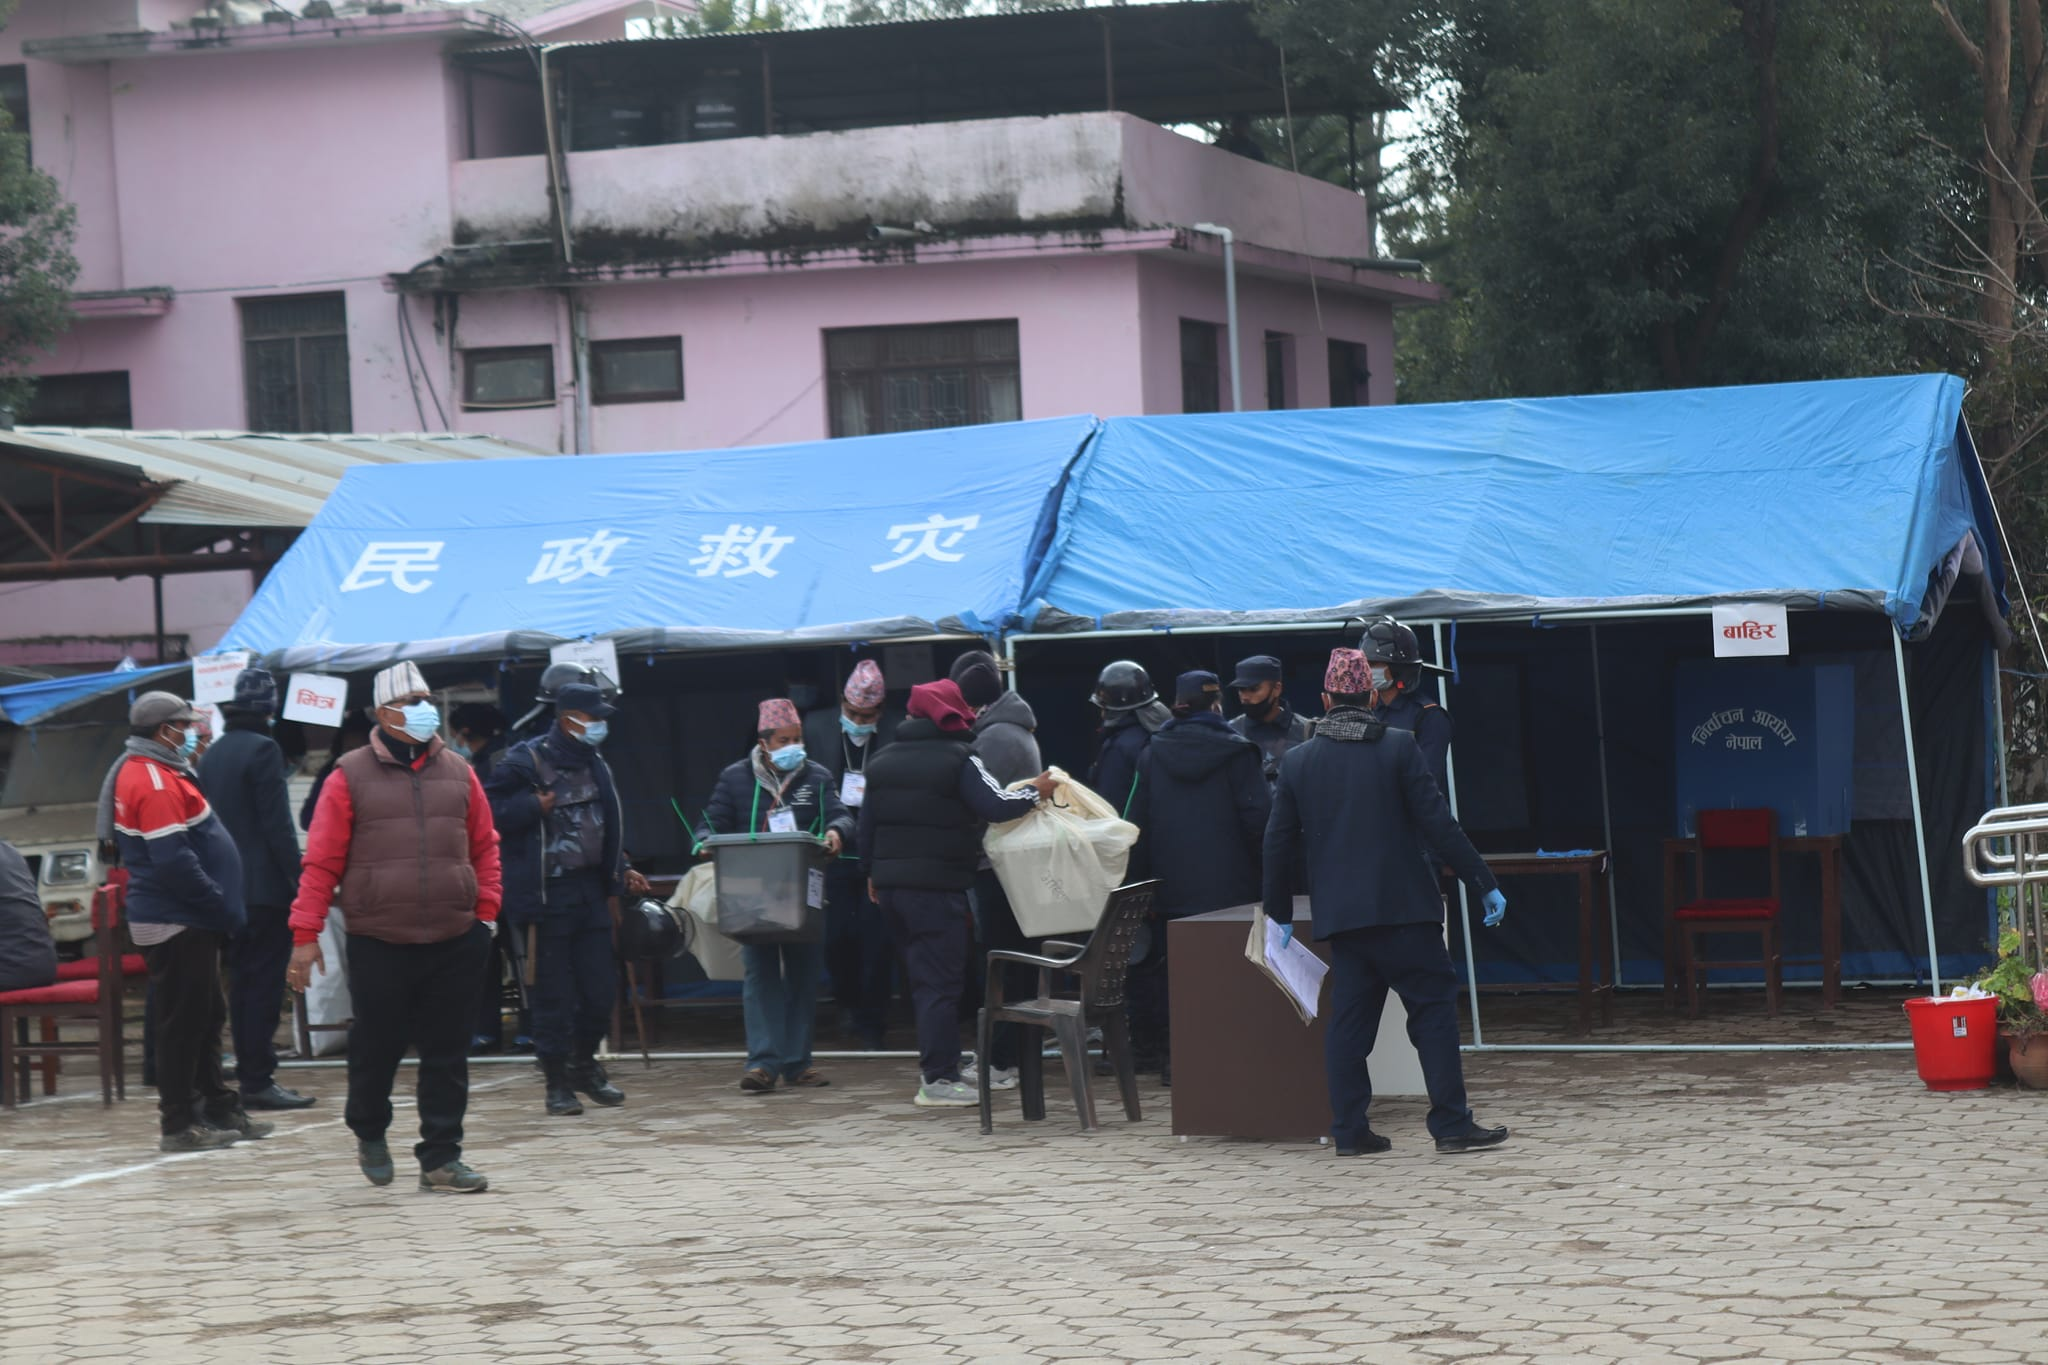 NA polls: Voting in Karnali Province concluded, preparations underway for vote count